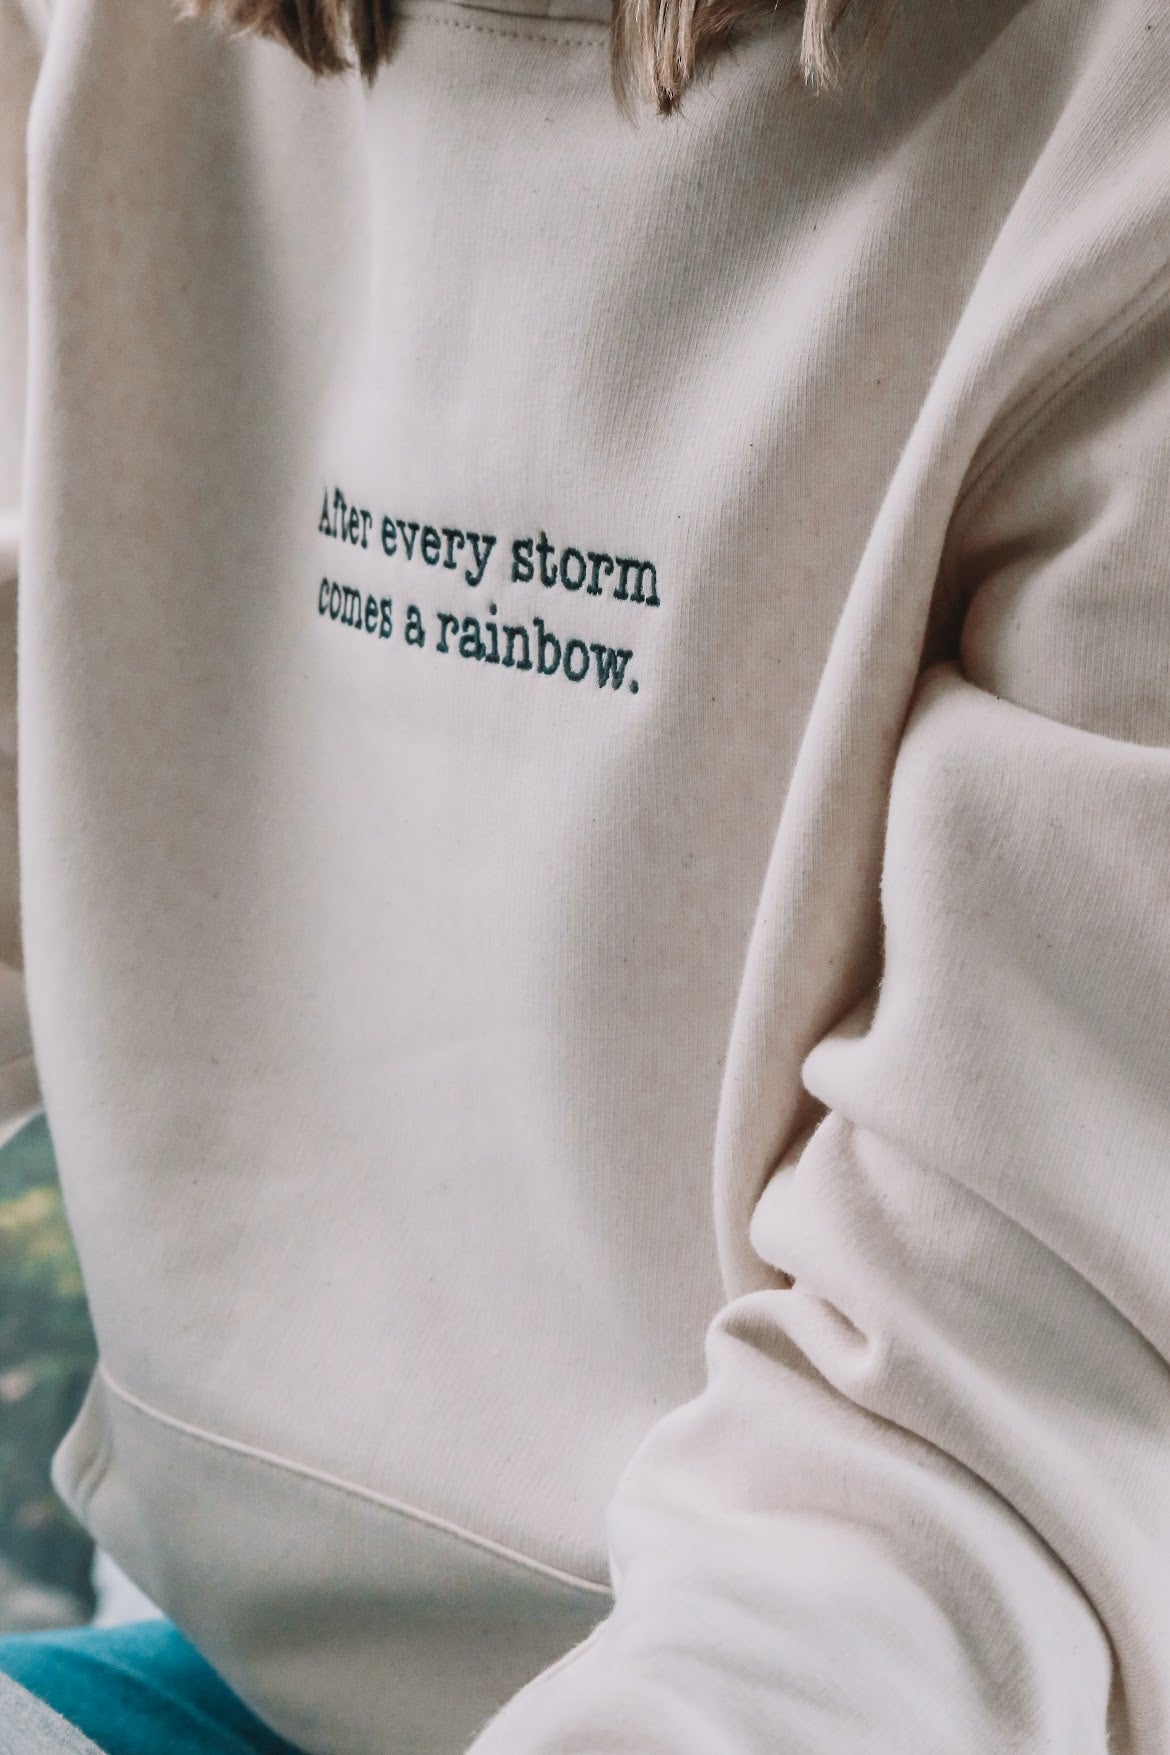 Hoodie 'After every storm comes a rainbow'